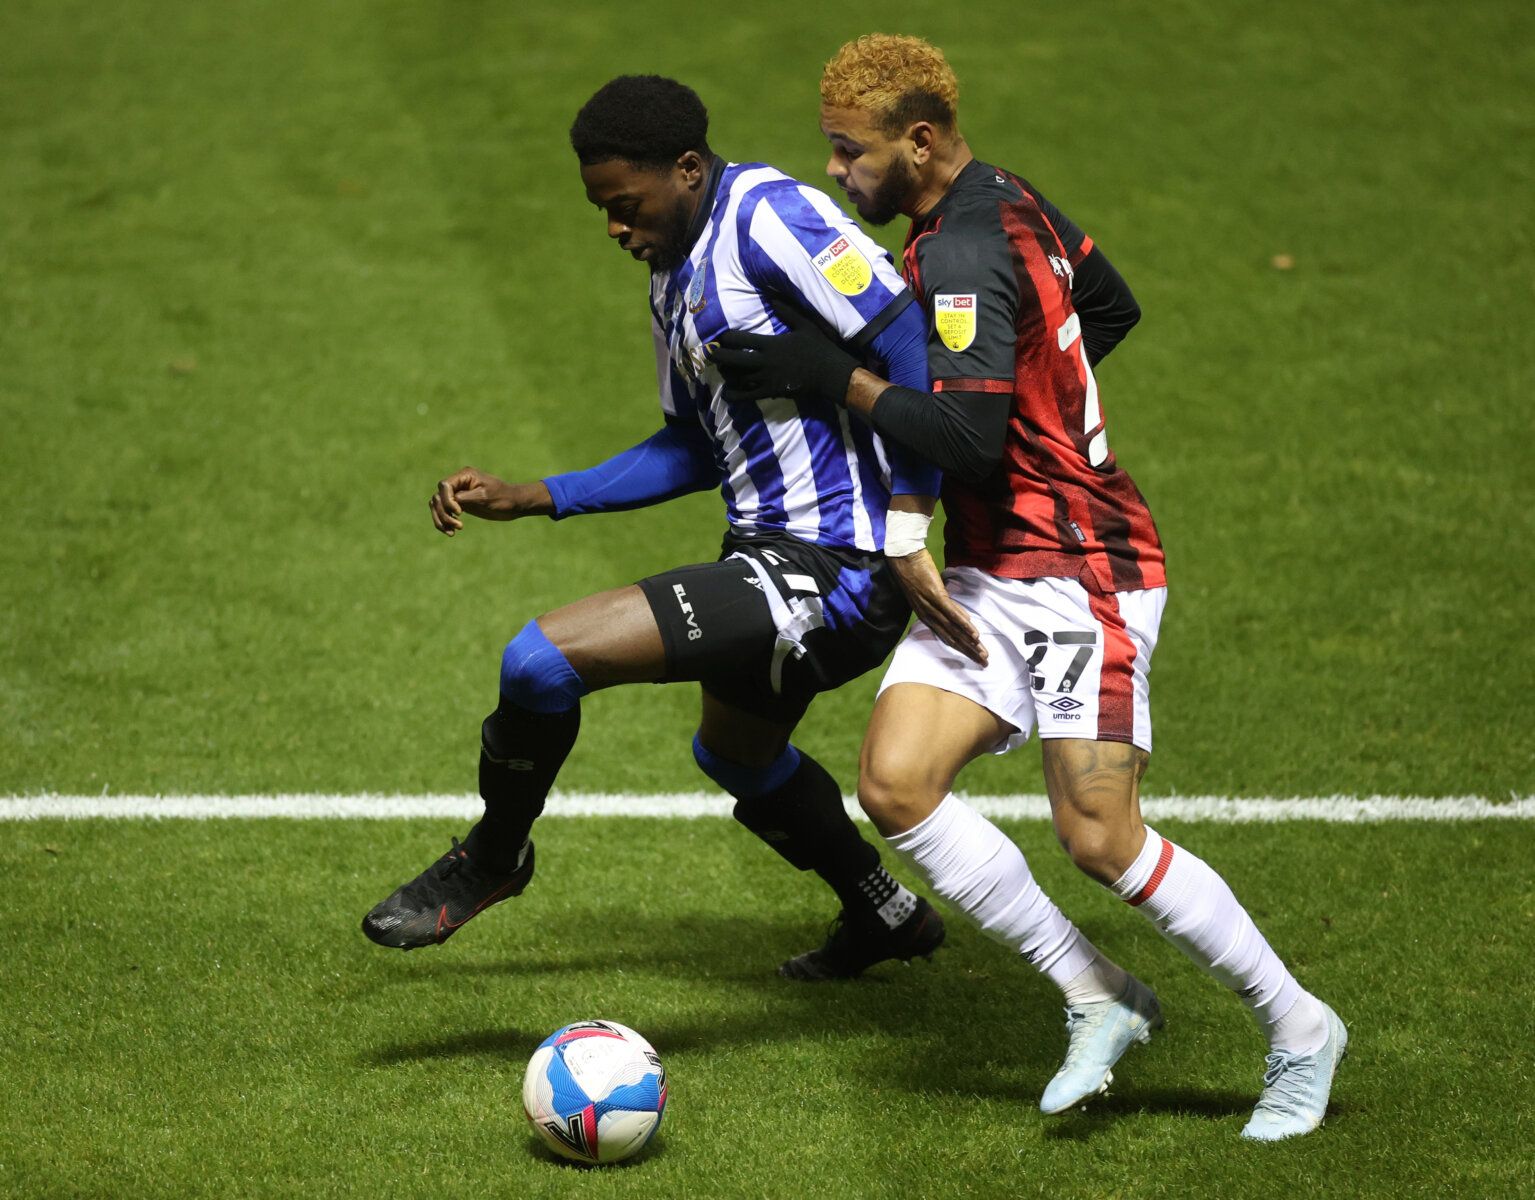 Soccer Football - Championship - Sheffield Wednesday v AFC Bournemouth - Hillsborough, Sheffield, Britain - November 3, 2020 Sheffield Wednesday's Dominic Iorfa in action with Bournemouth's Joshua King Action Images/Carl Recine EDITORIAL USE ONLY. No use with unauthorized audio, video, data, fixture lists, club/league logos or 'live' services. Online in-match use limited to 75 images, no video emulation. No use in betting, games or single club /league/player publications.  Please contact your ac